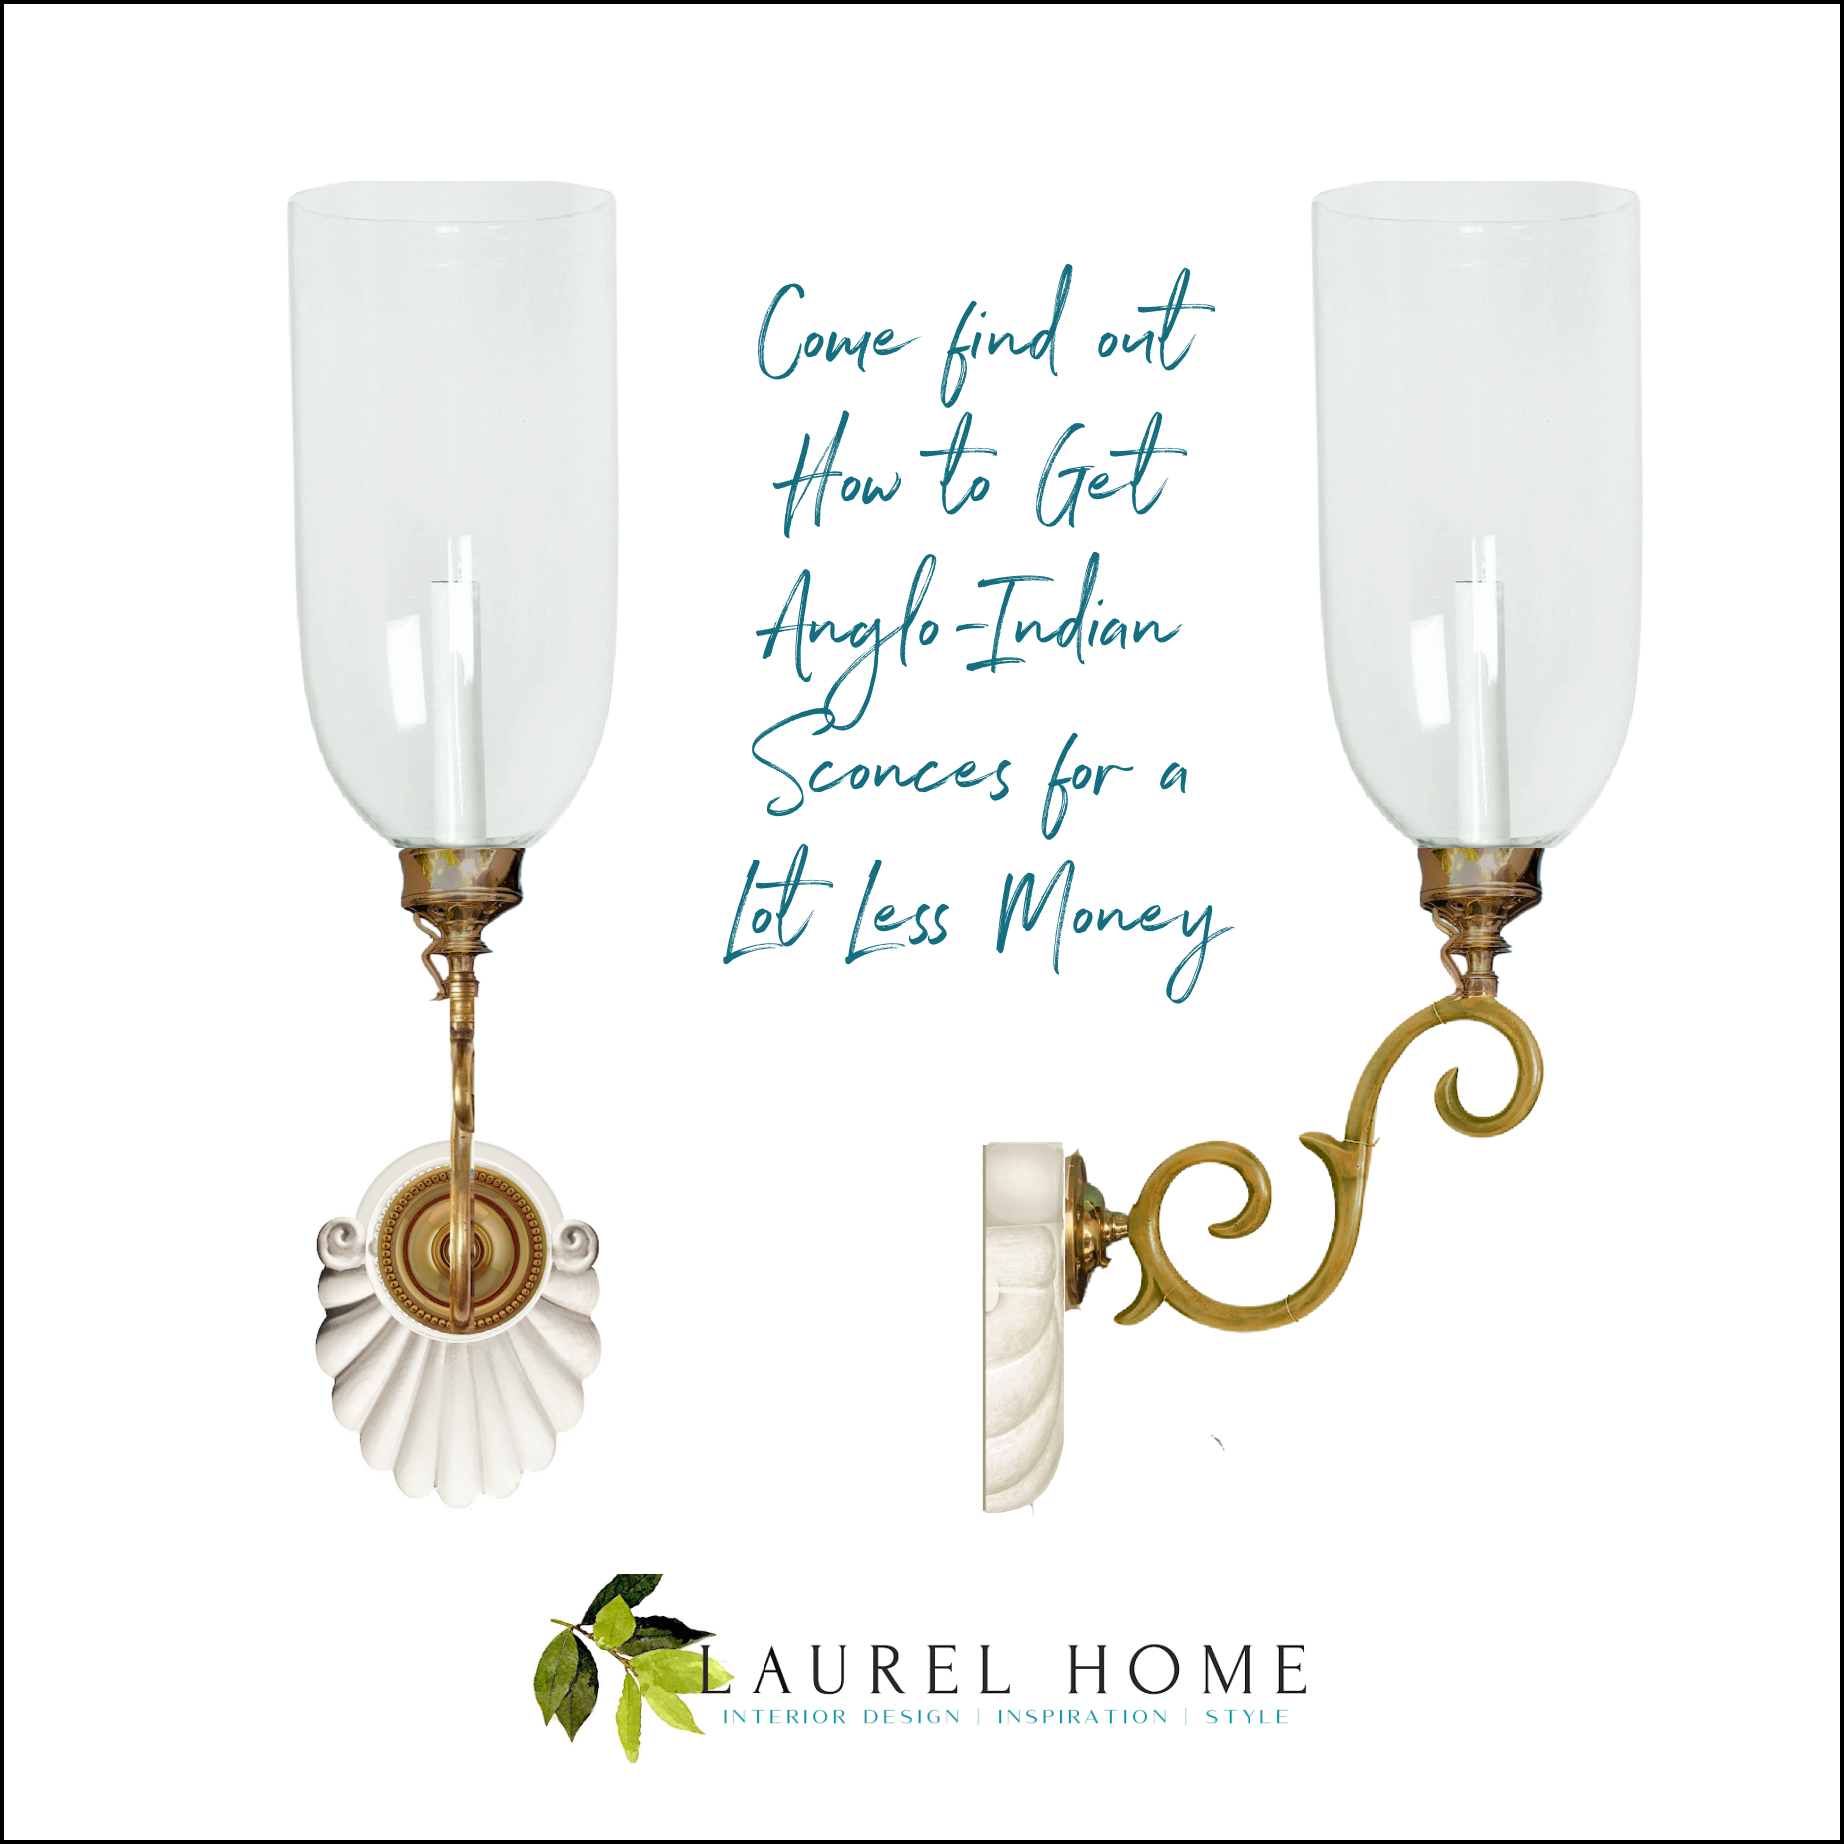 Anglo-Indian Sconces - White Shells - I found an inexpensive way to make this gorgeous high-end lighting